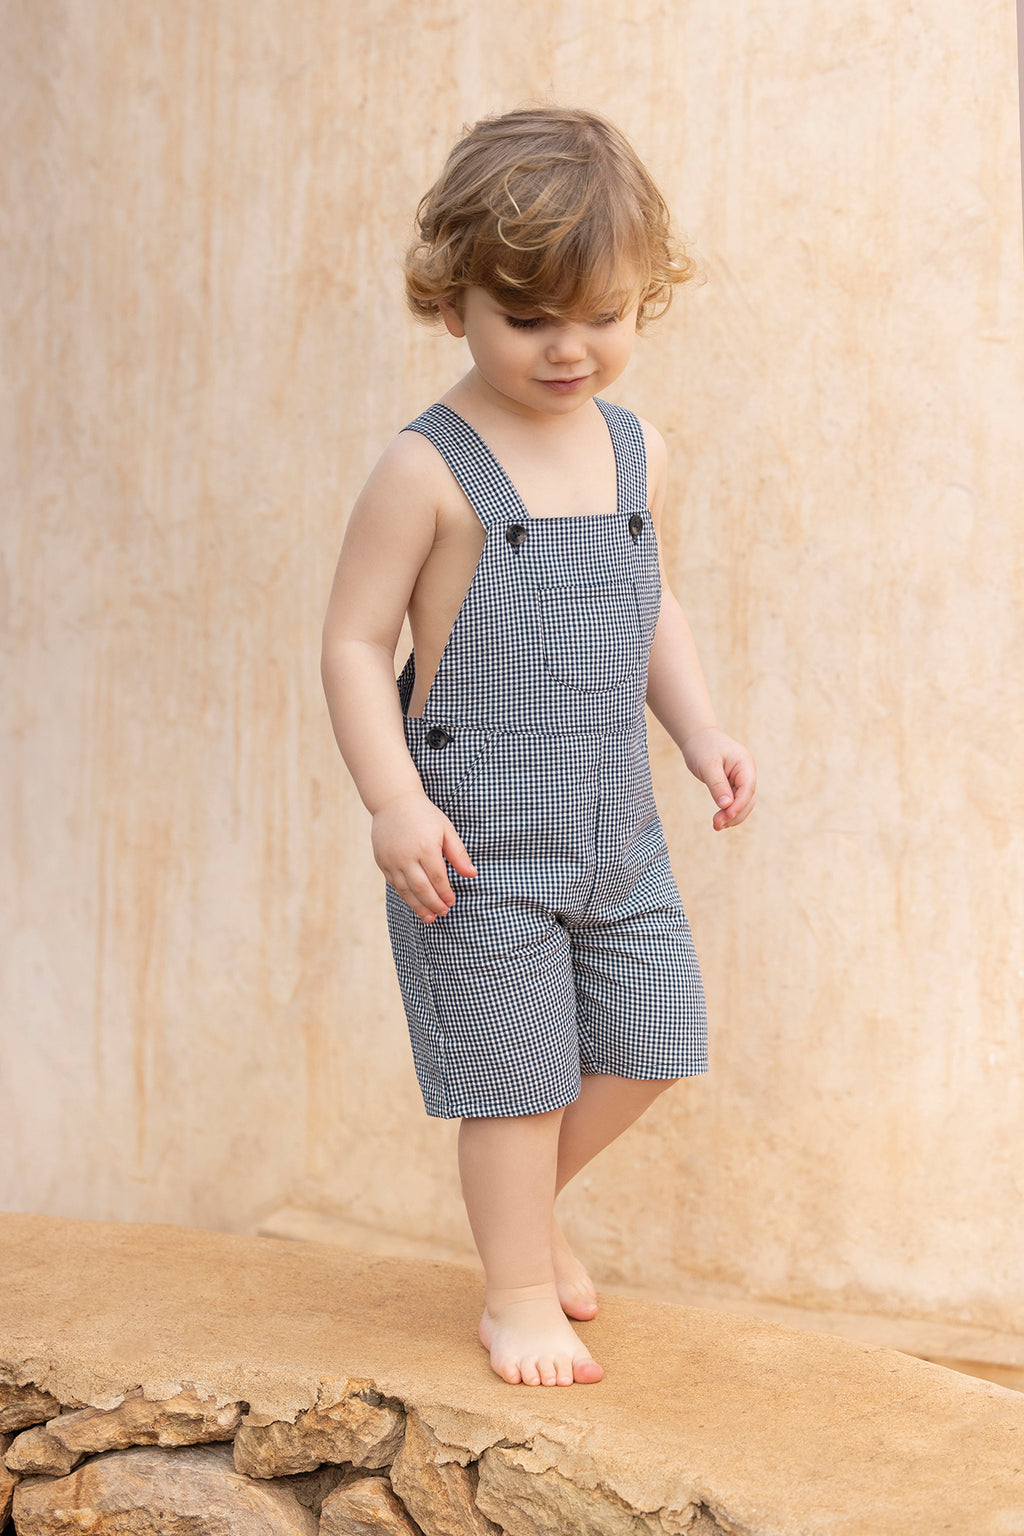 dungaree short - Navy Two-tone gingham